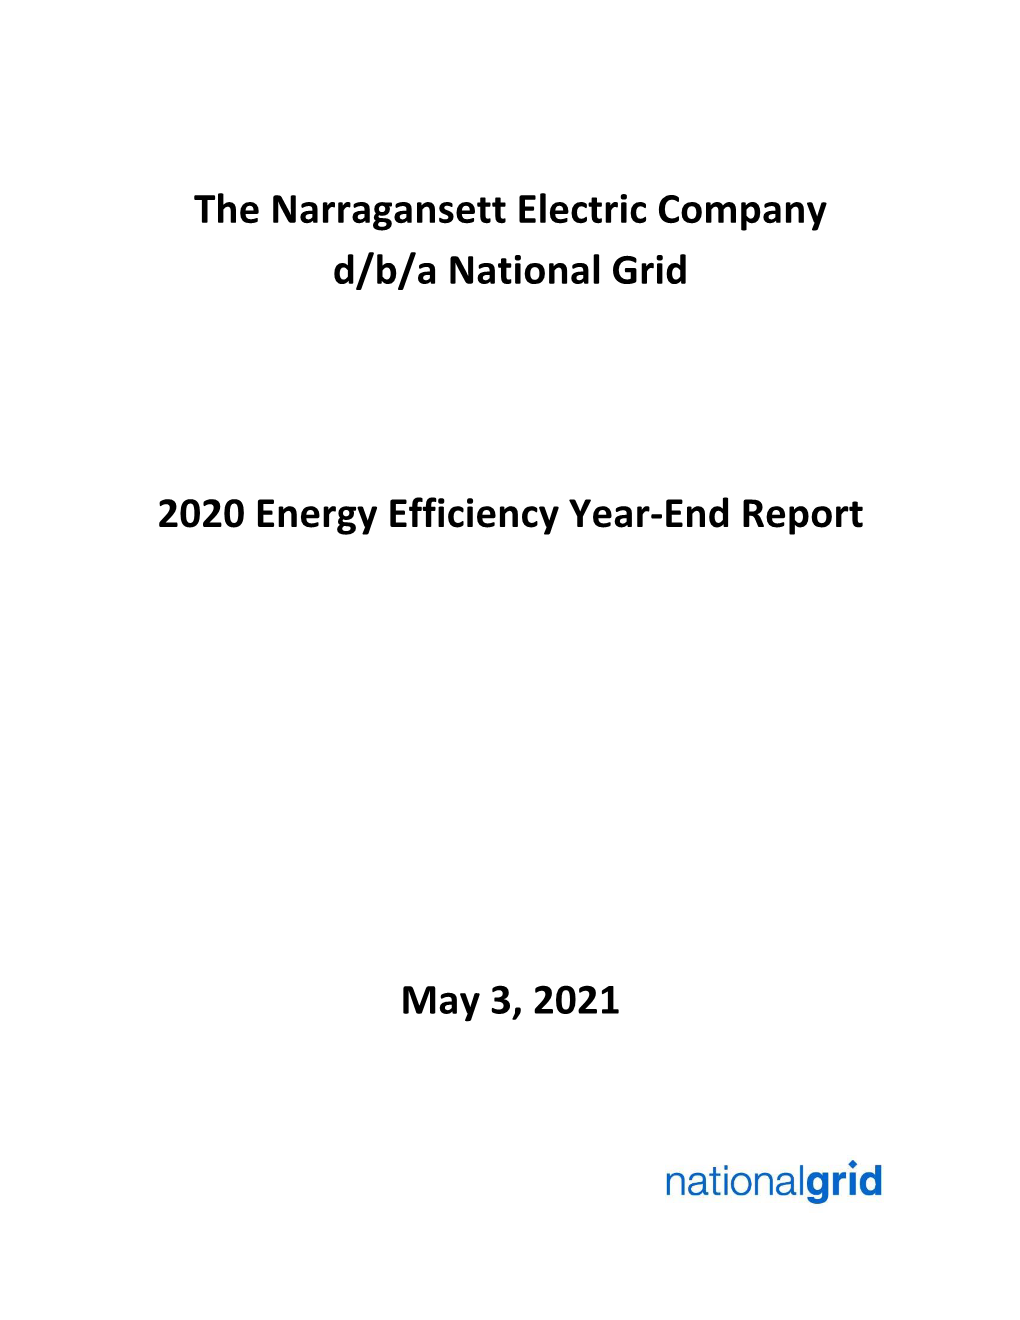 The Narragansett Electric Company D/B/A National Grid 2020 Energy Efficiency Year-End Report May 3, 2021